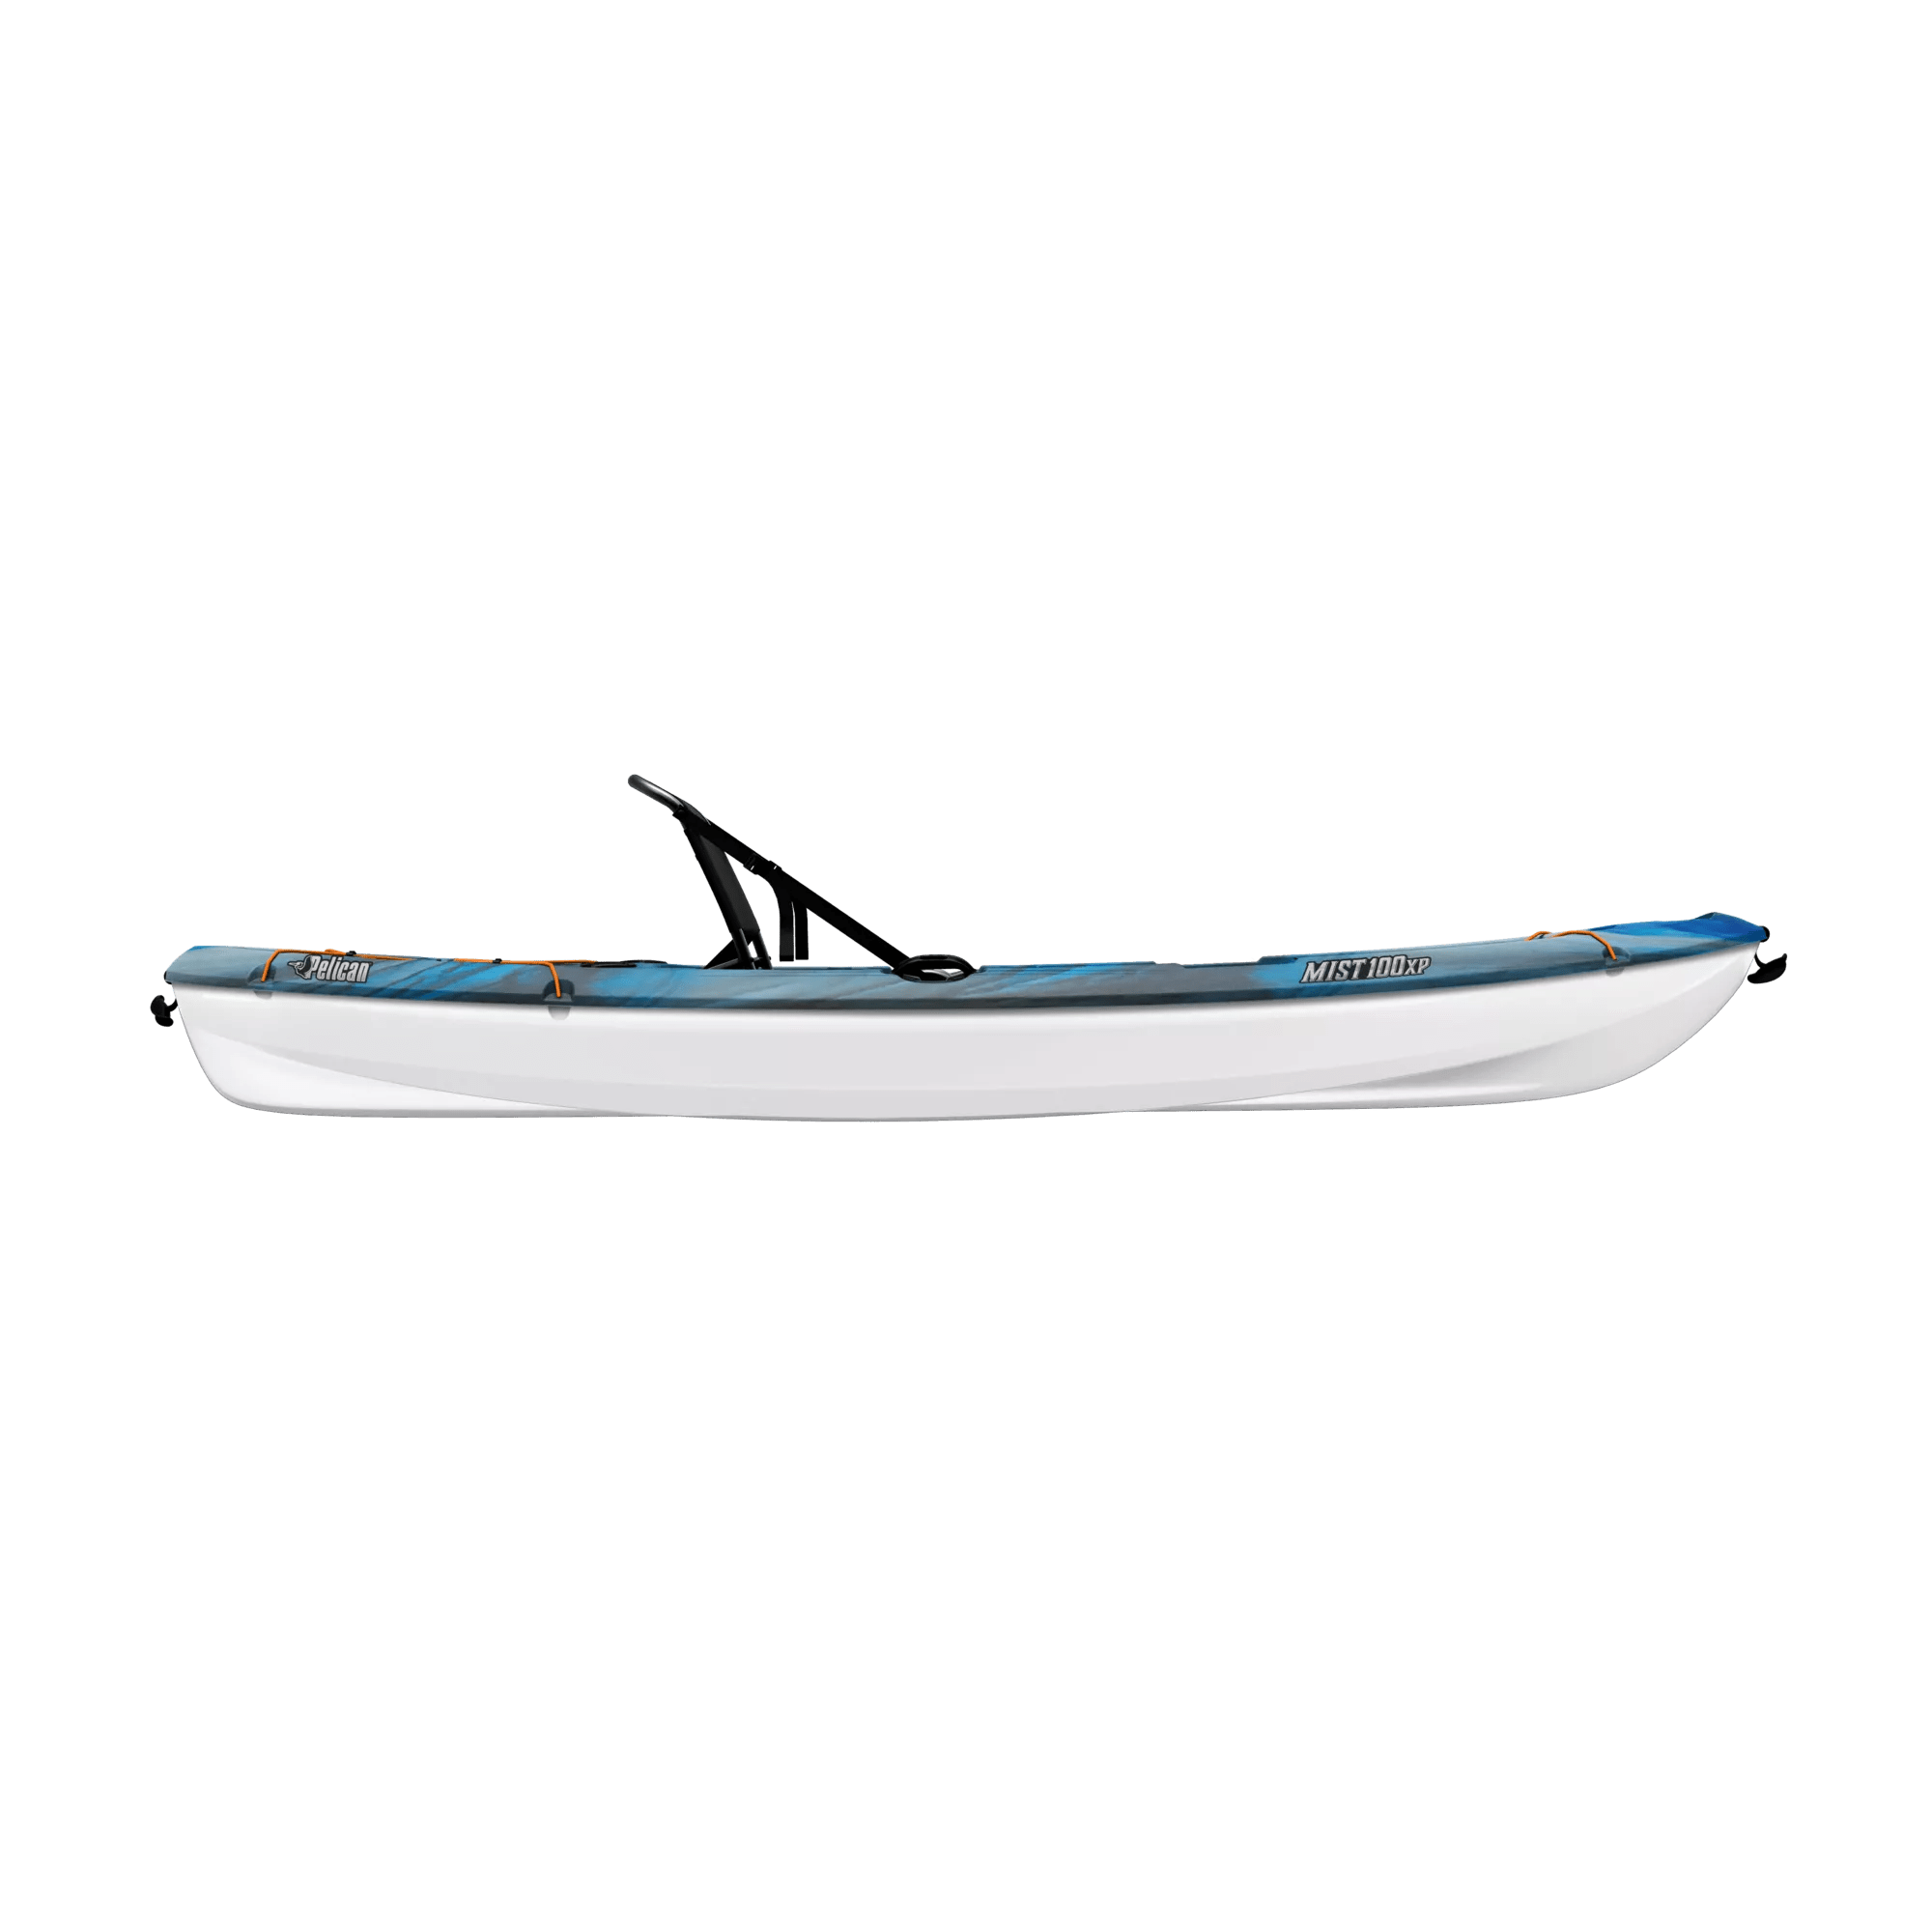 PELICAN - Mist 100XP Angler kayak with Paddle - Blue - MGF10P102-00 - SIDE